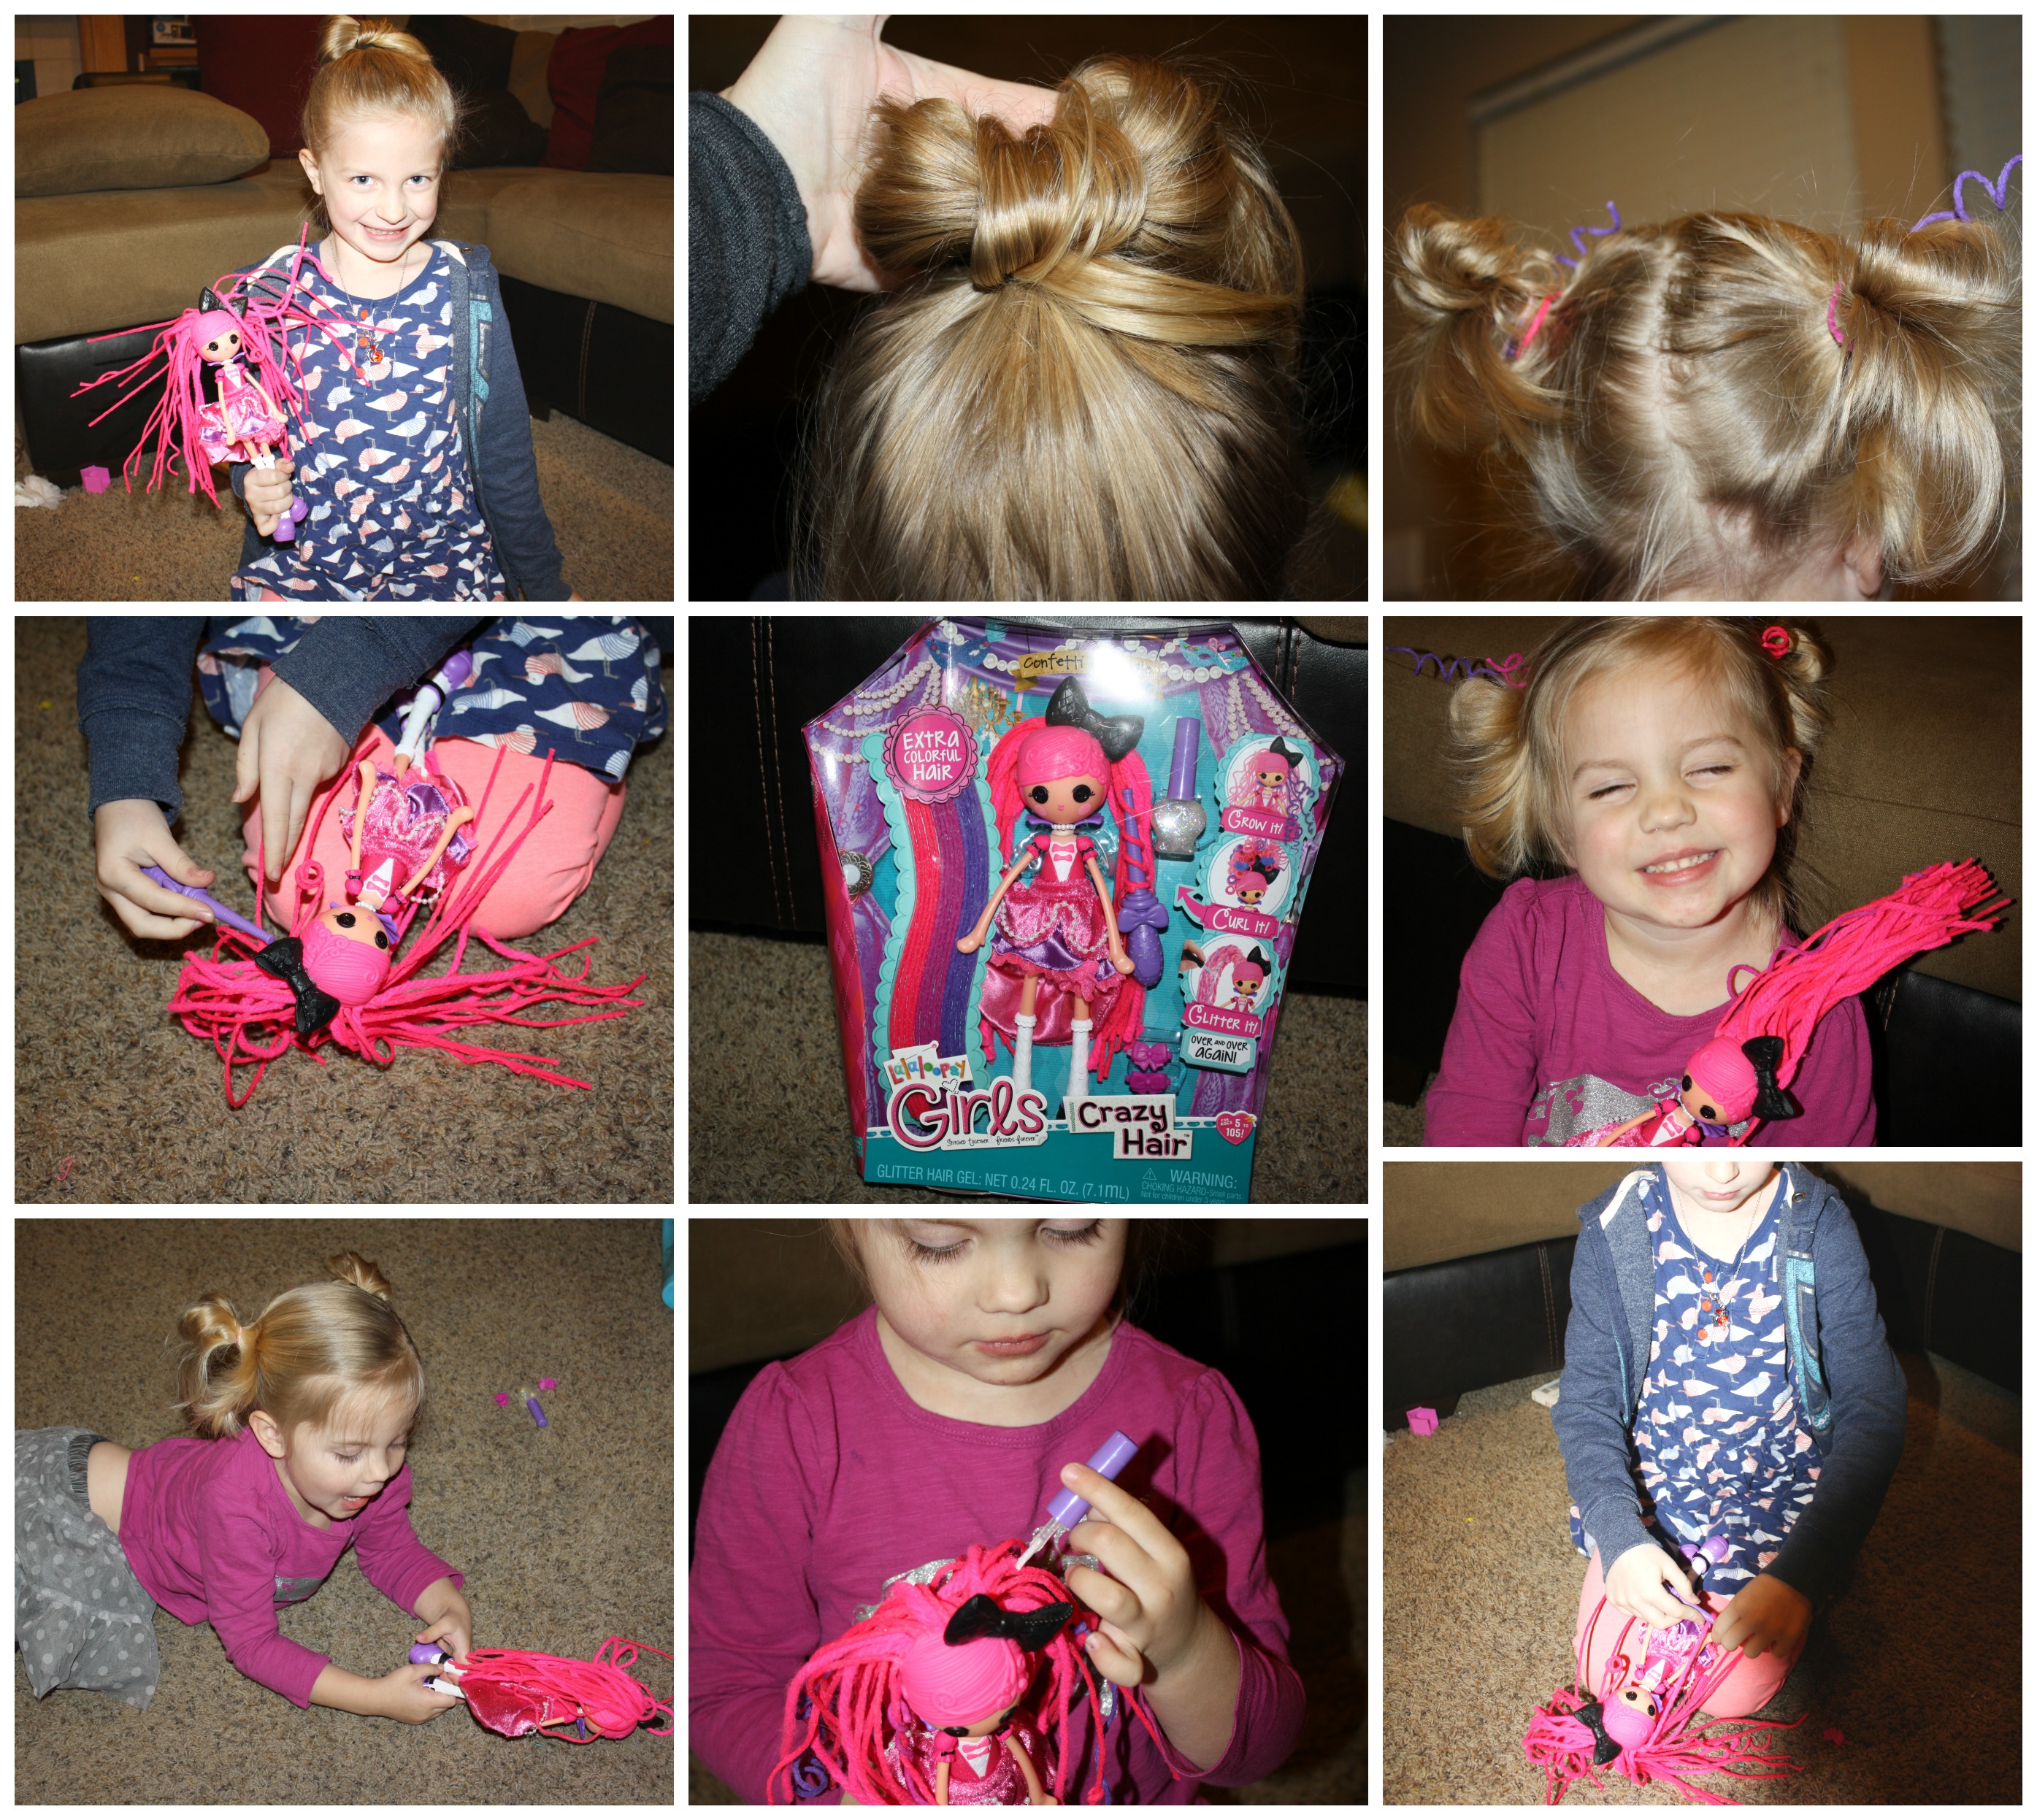 Celebrate Crazy Hair Day today with Lalaloopsy Girls Crazy Hair Doll! # CrazyHairDay